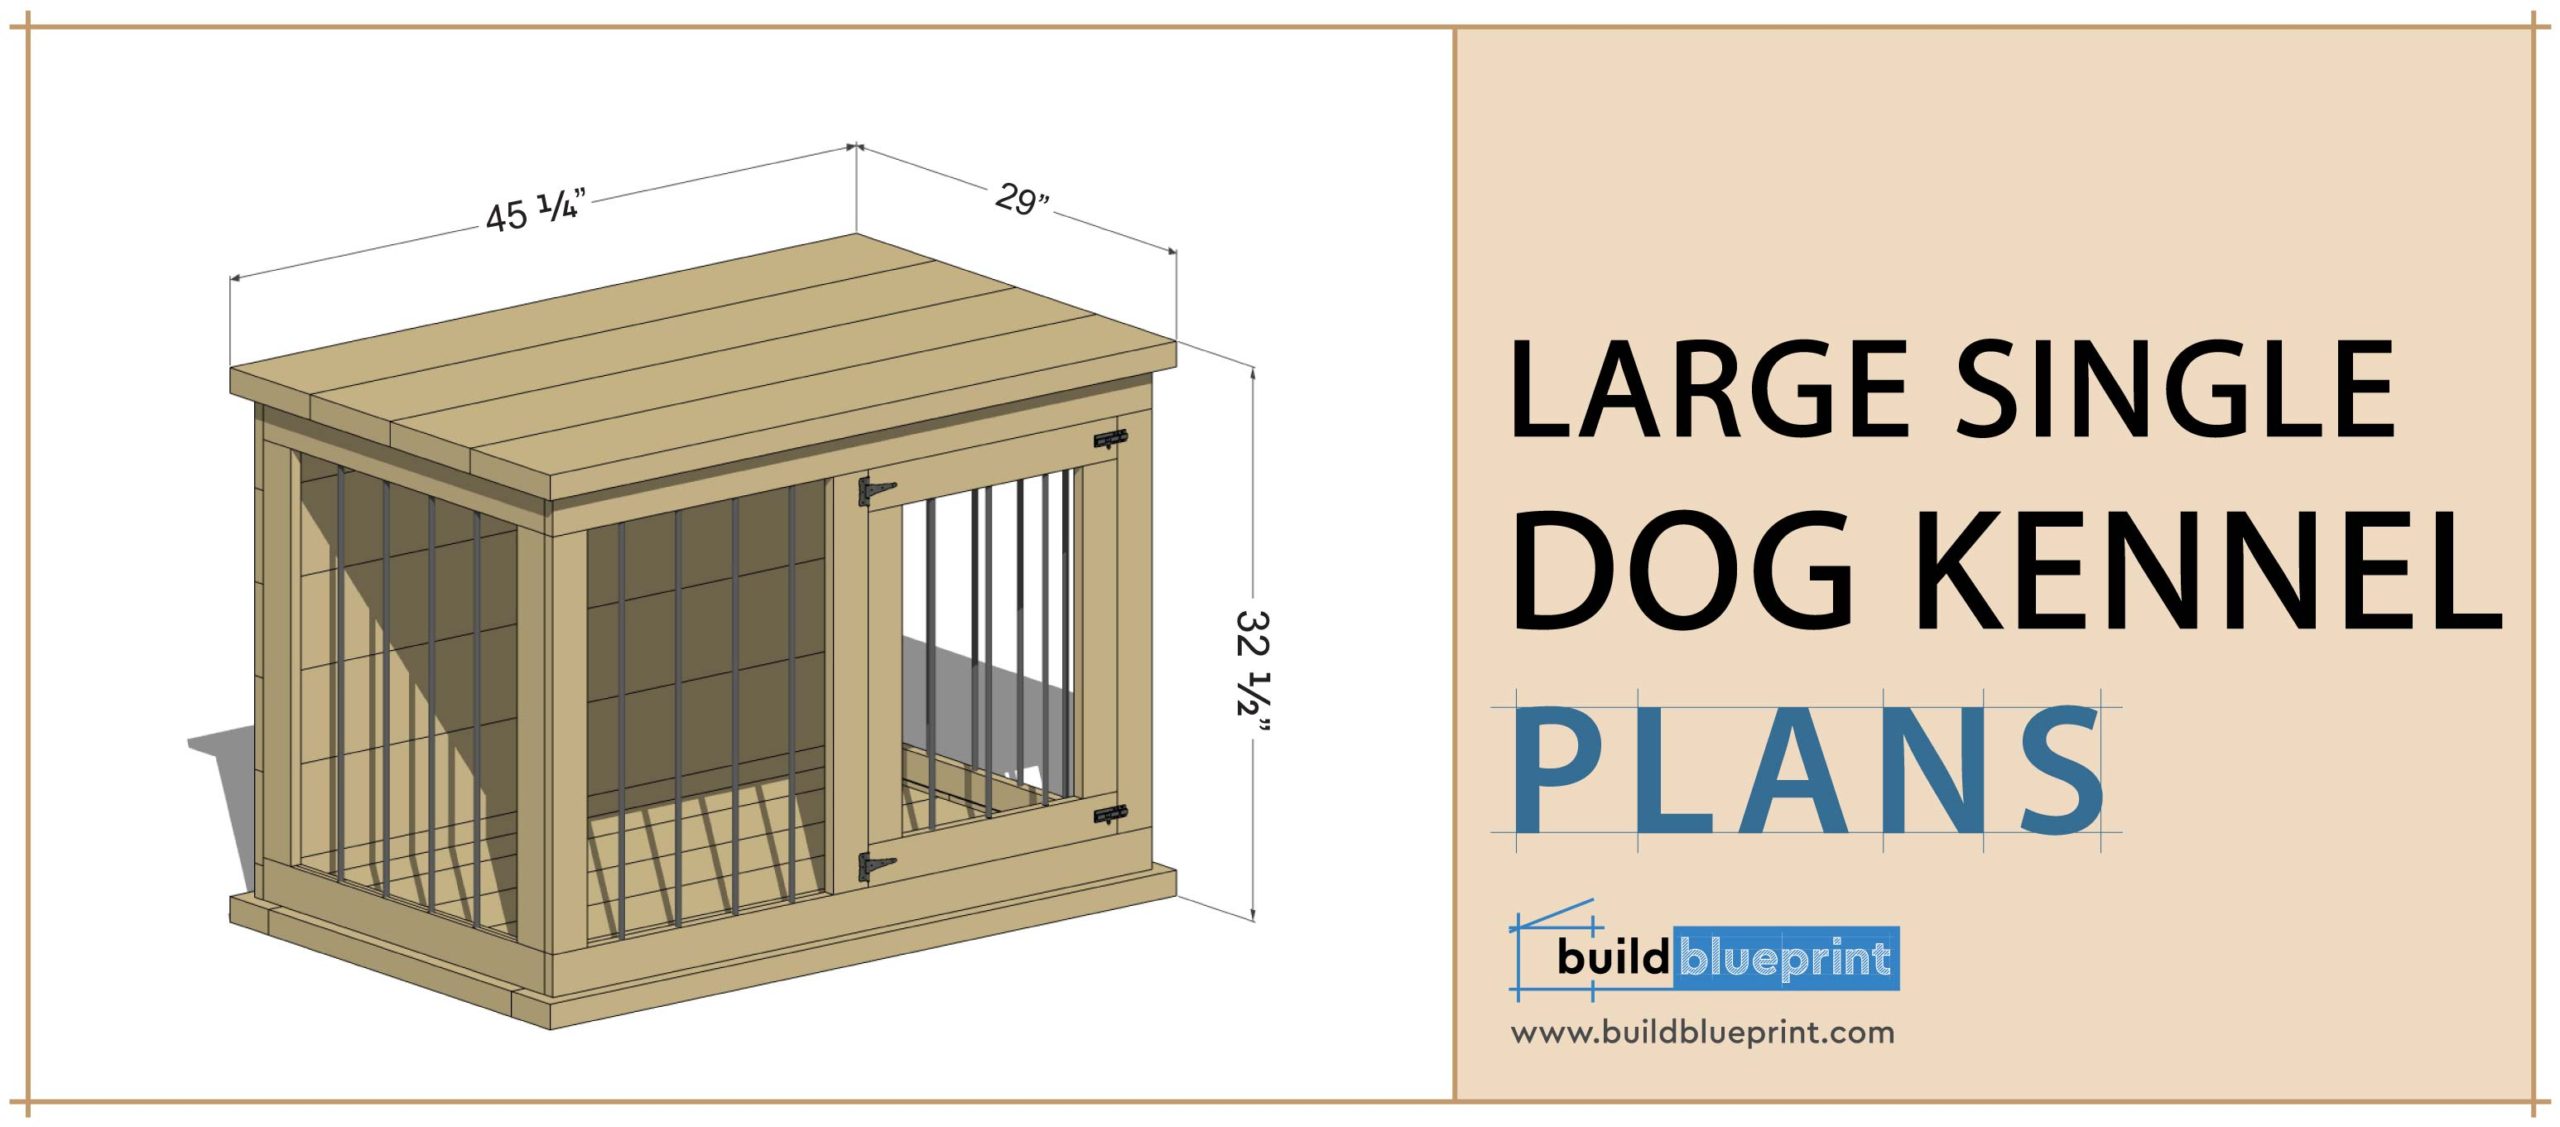 How To Build A Dog Kennel From Scratch Single Dog Kennel DIY Plans - Build Blueprint